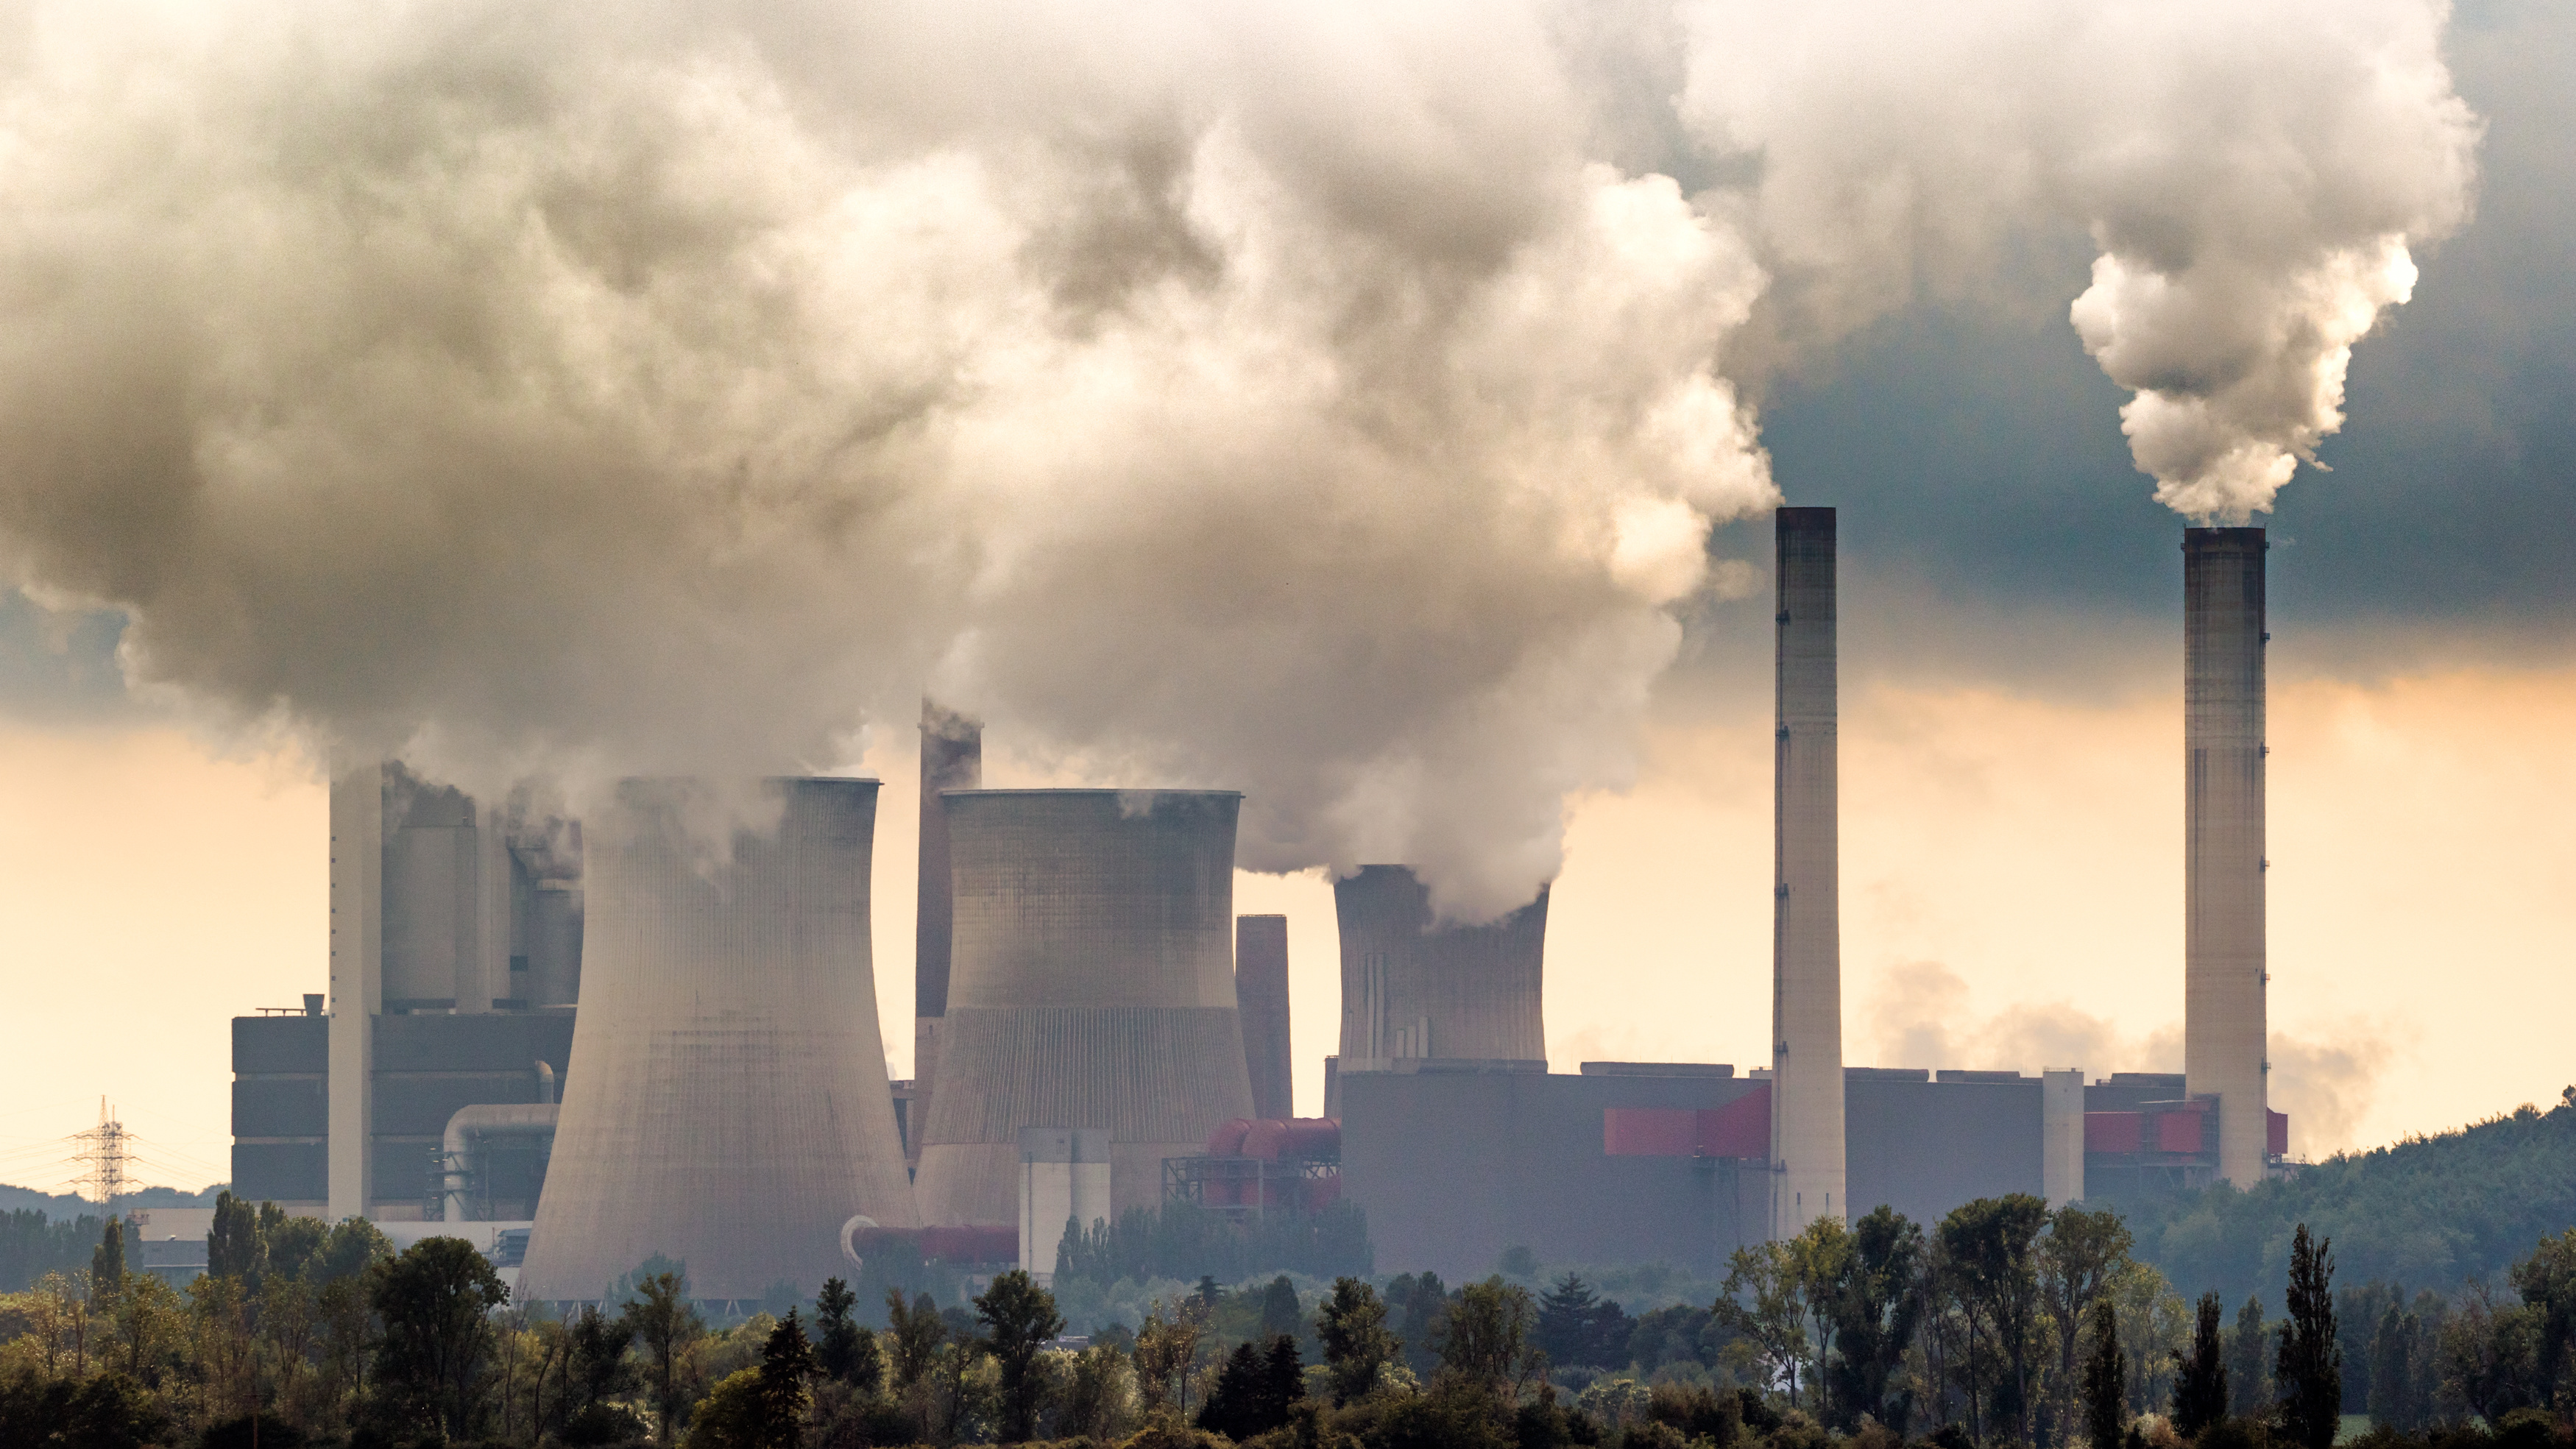 Large fossil fuel power plant station emission causing air pollution.